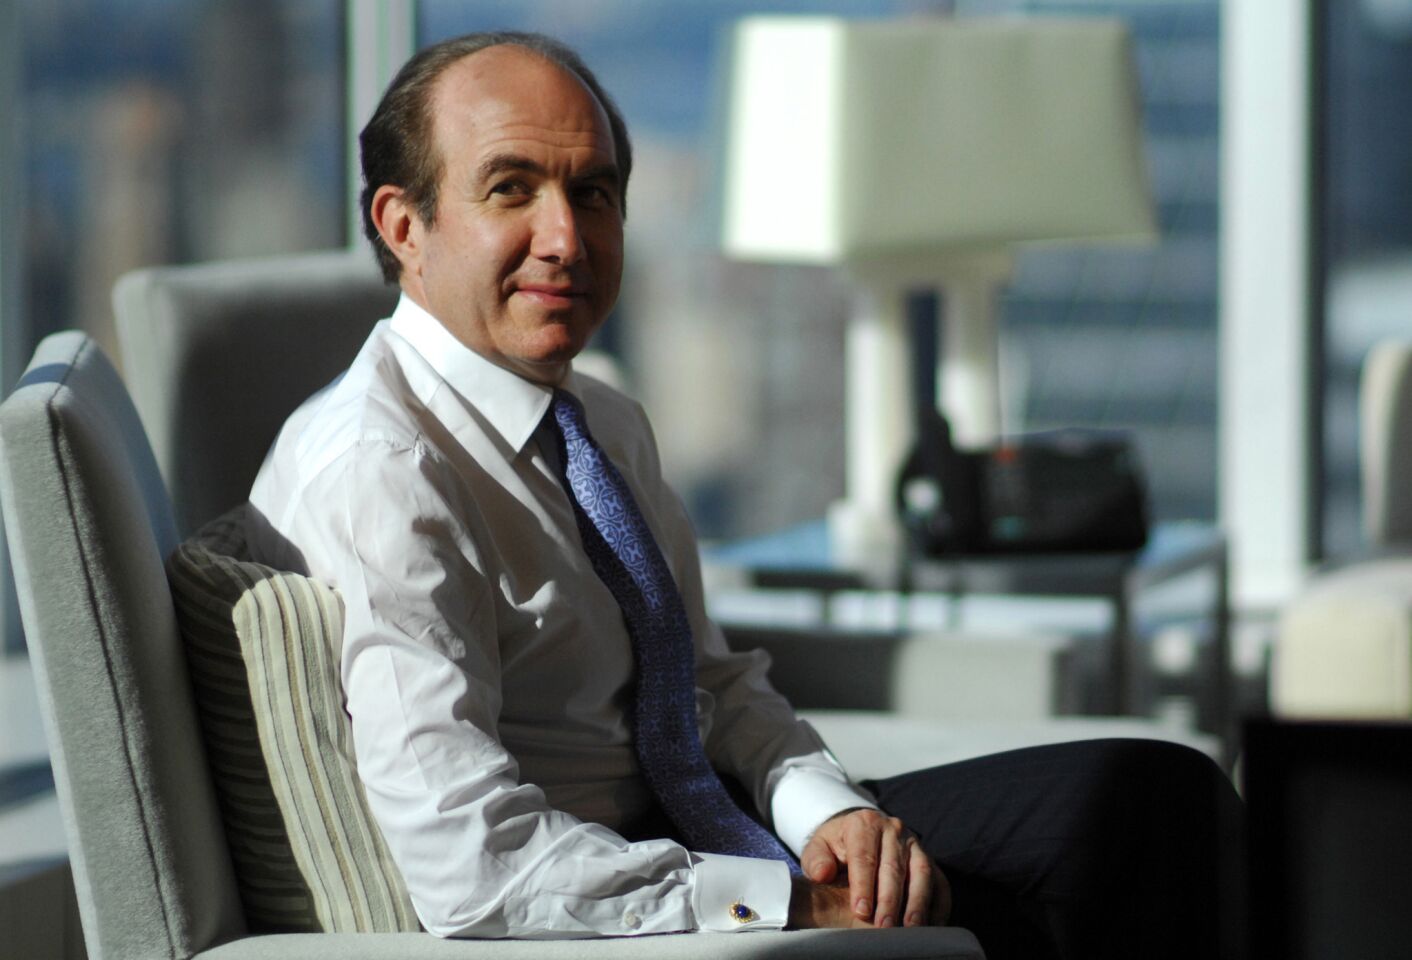 Dauman, chief executive of Viacom Inc., received a compensation package of $37.2 million, which is an 11% rise from 2012. With a $3.5-million base salary, Dauman also obtained a cash bonus of $16.9 million, plus stock worth more than $10 million.